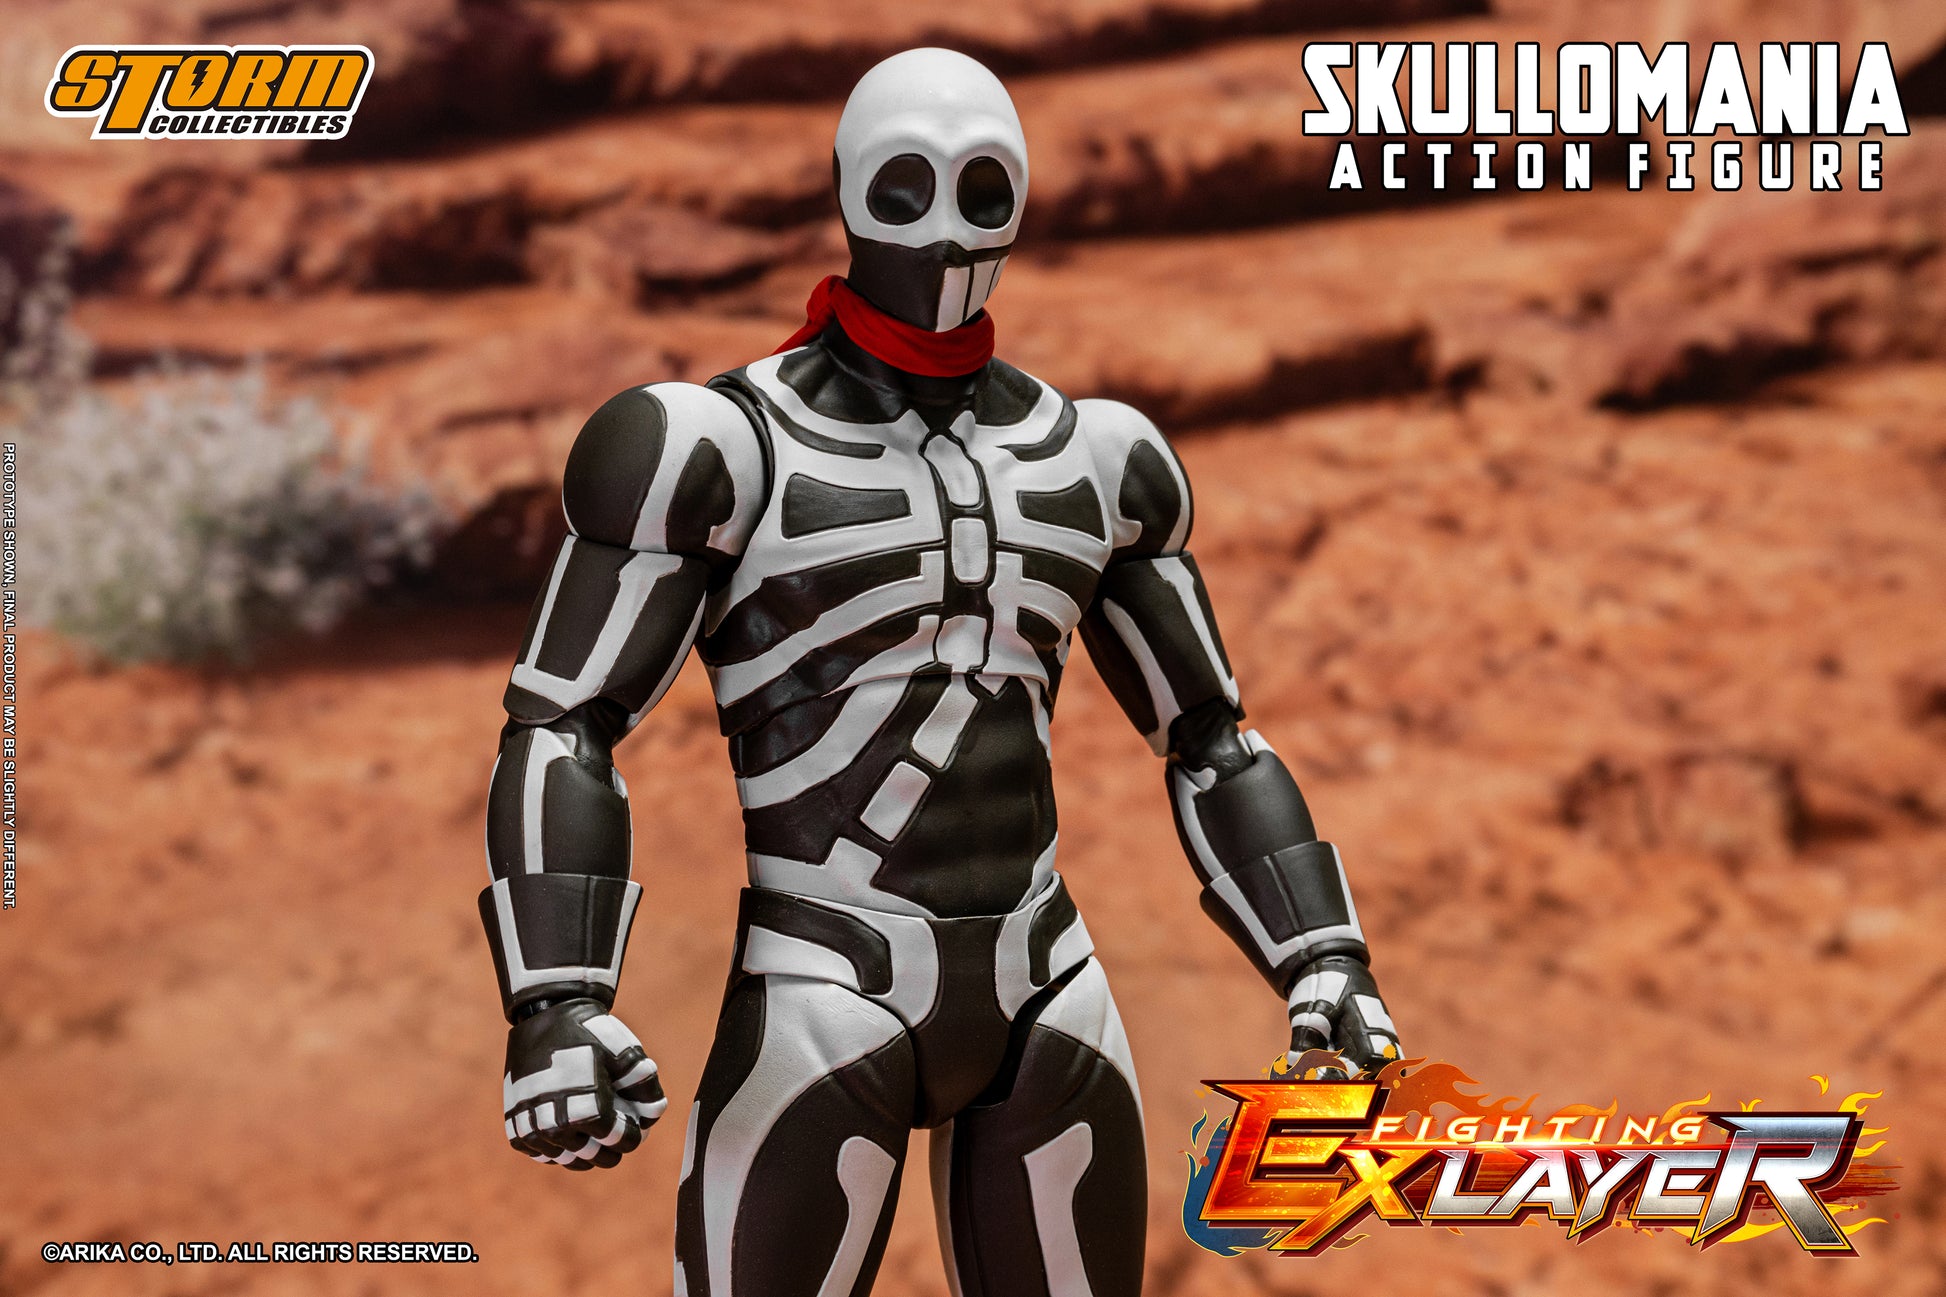 Street Fighter EX Layer Skullomania 1/12 Scale by Storm Collectibles super close up view